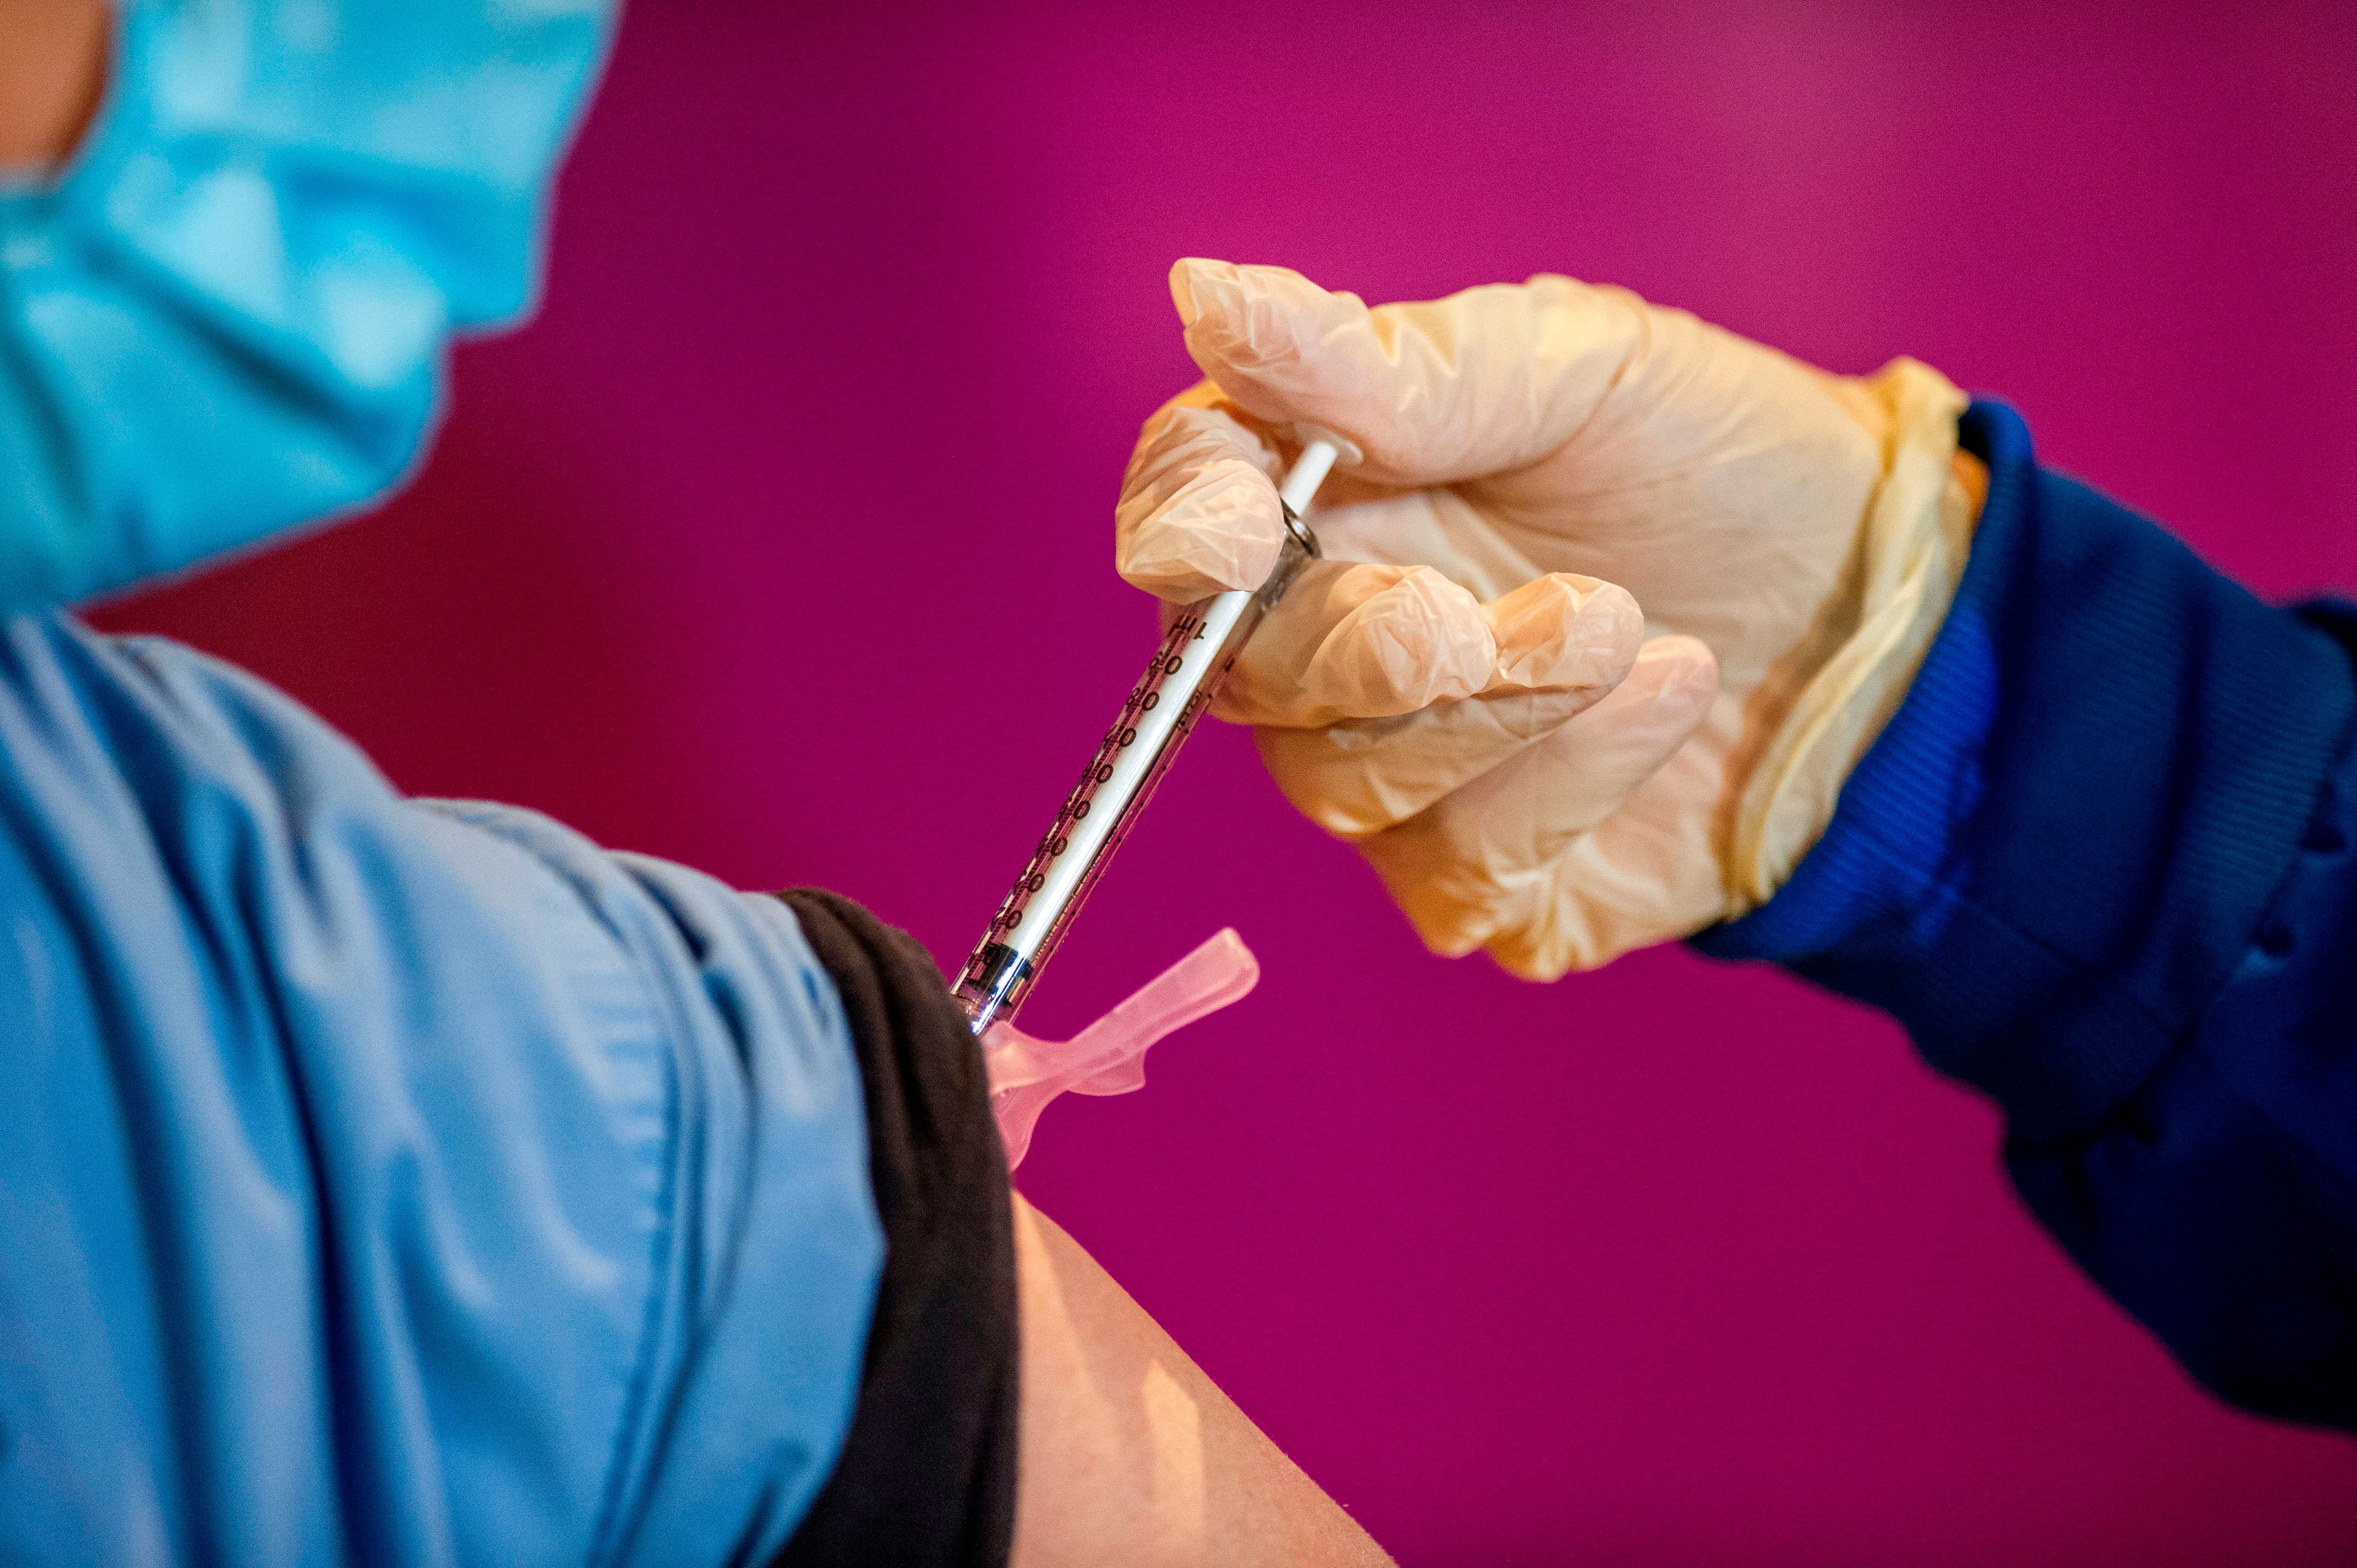 A registered nurse administers the second dose of the Pfizer/BioNTech Covid-19 vaccine to a health care worker in Hartford, Connecticut, on January 4.